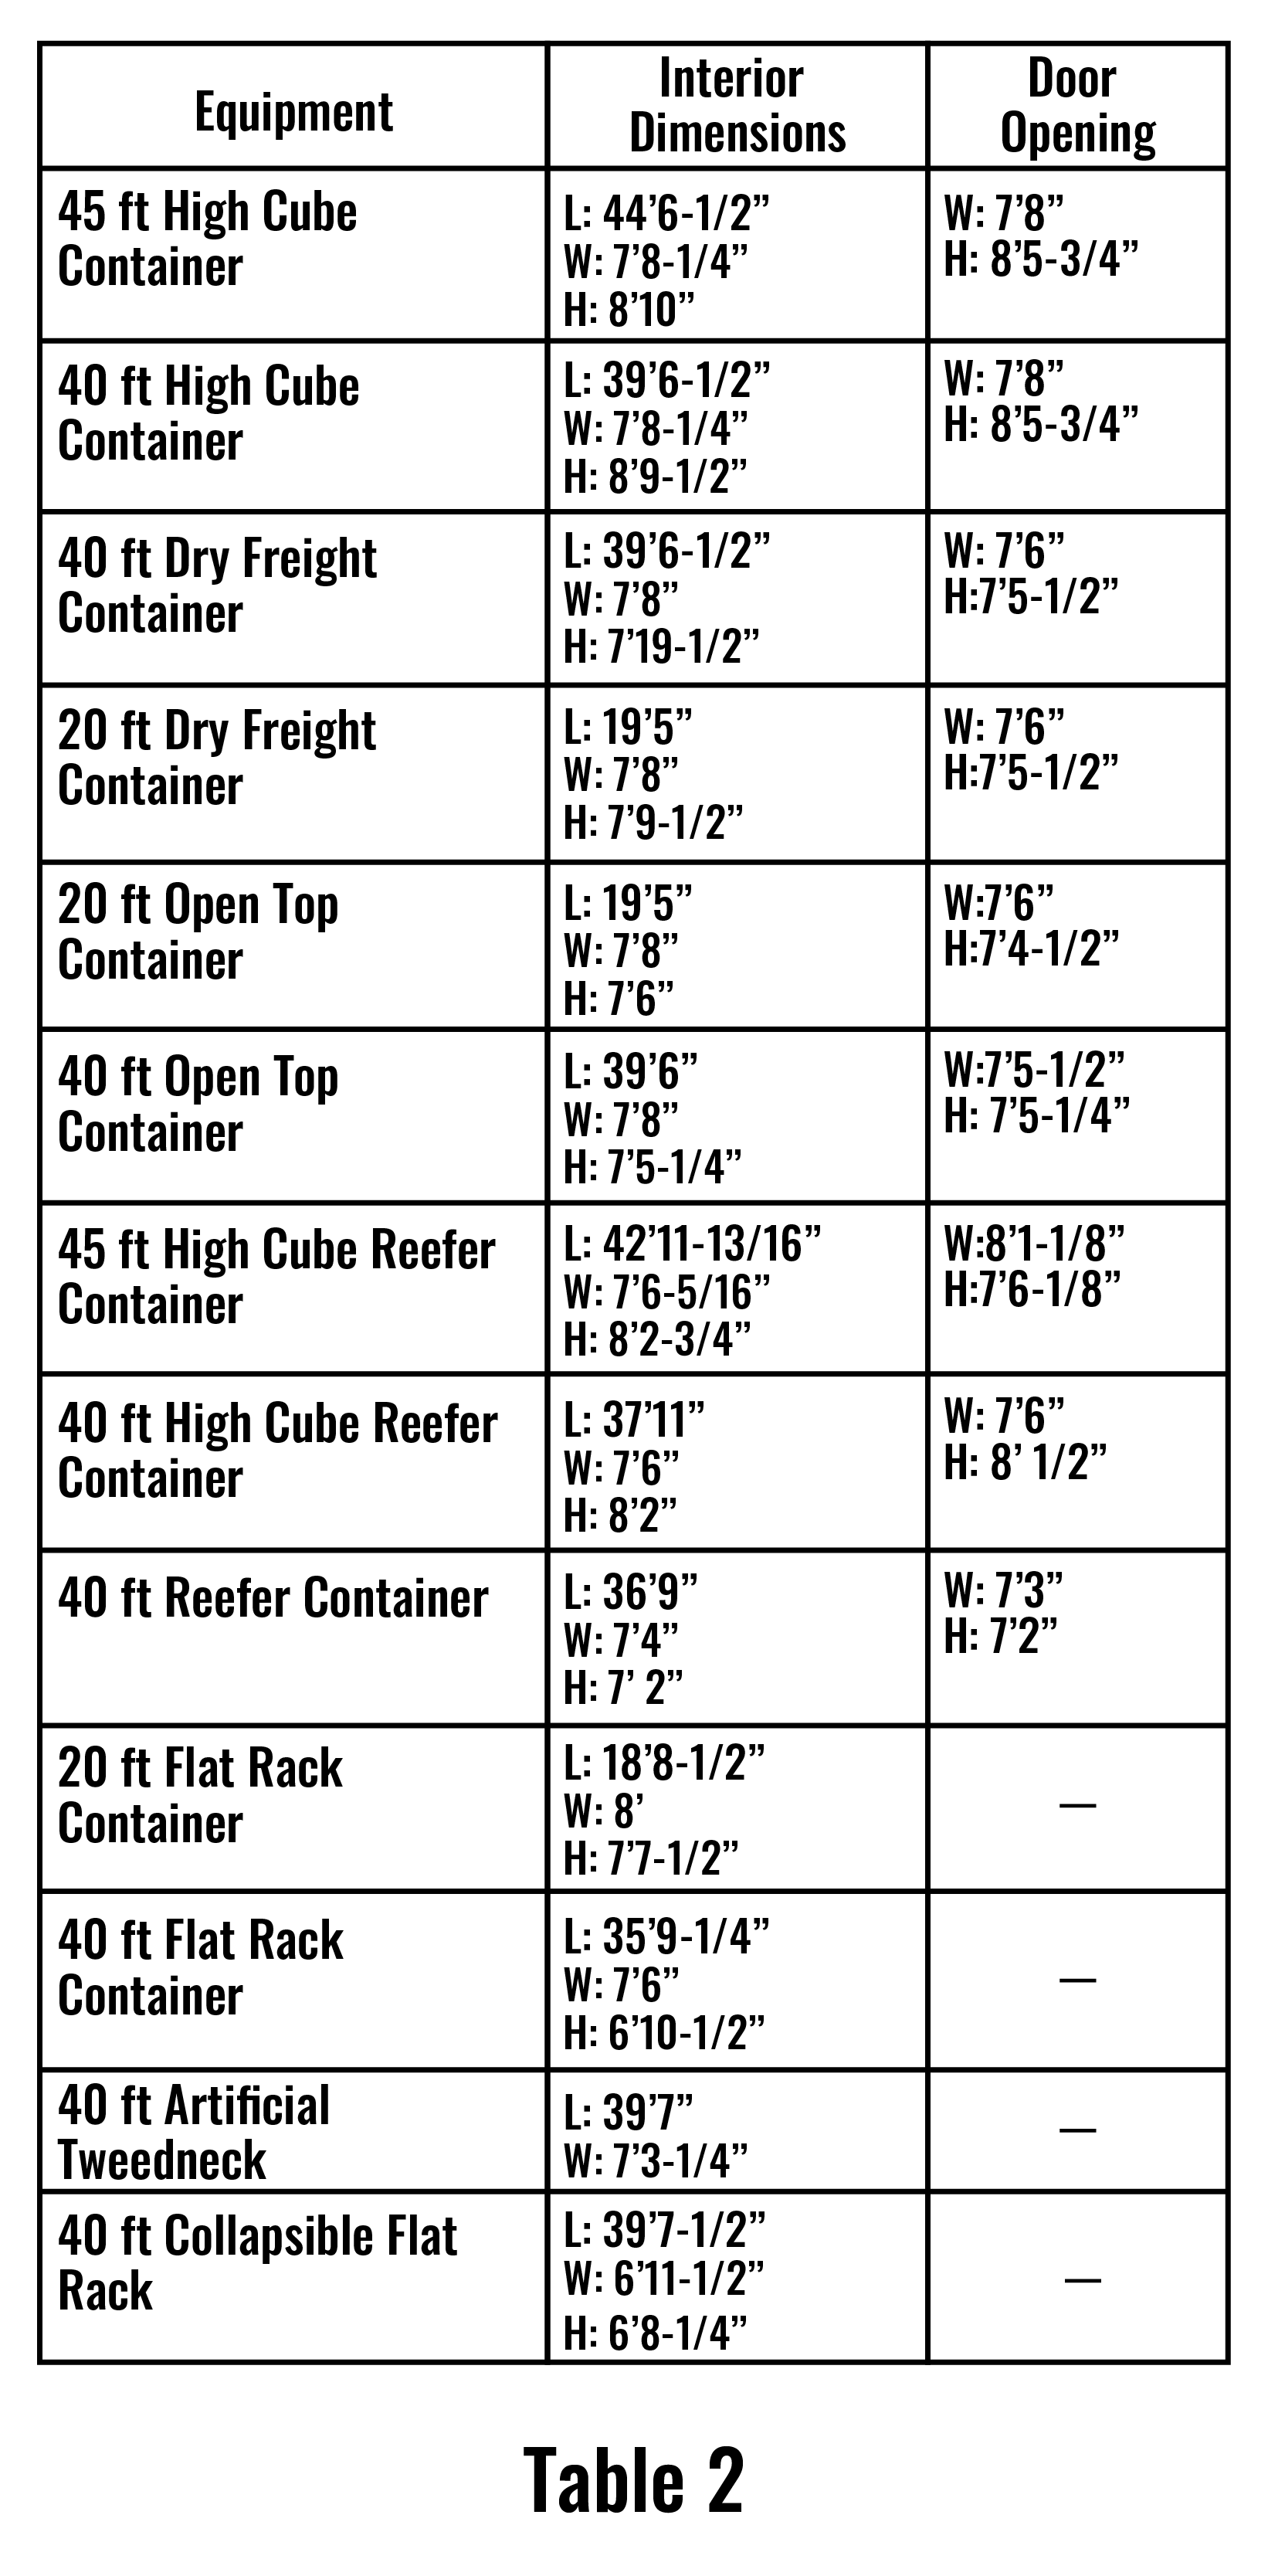 Text Table Comparing Equipment, Interior Dimensions, and Door Opening Size